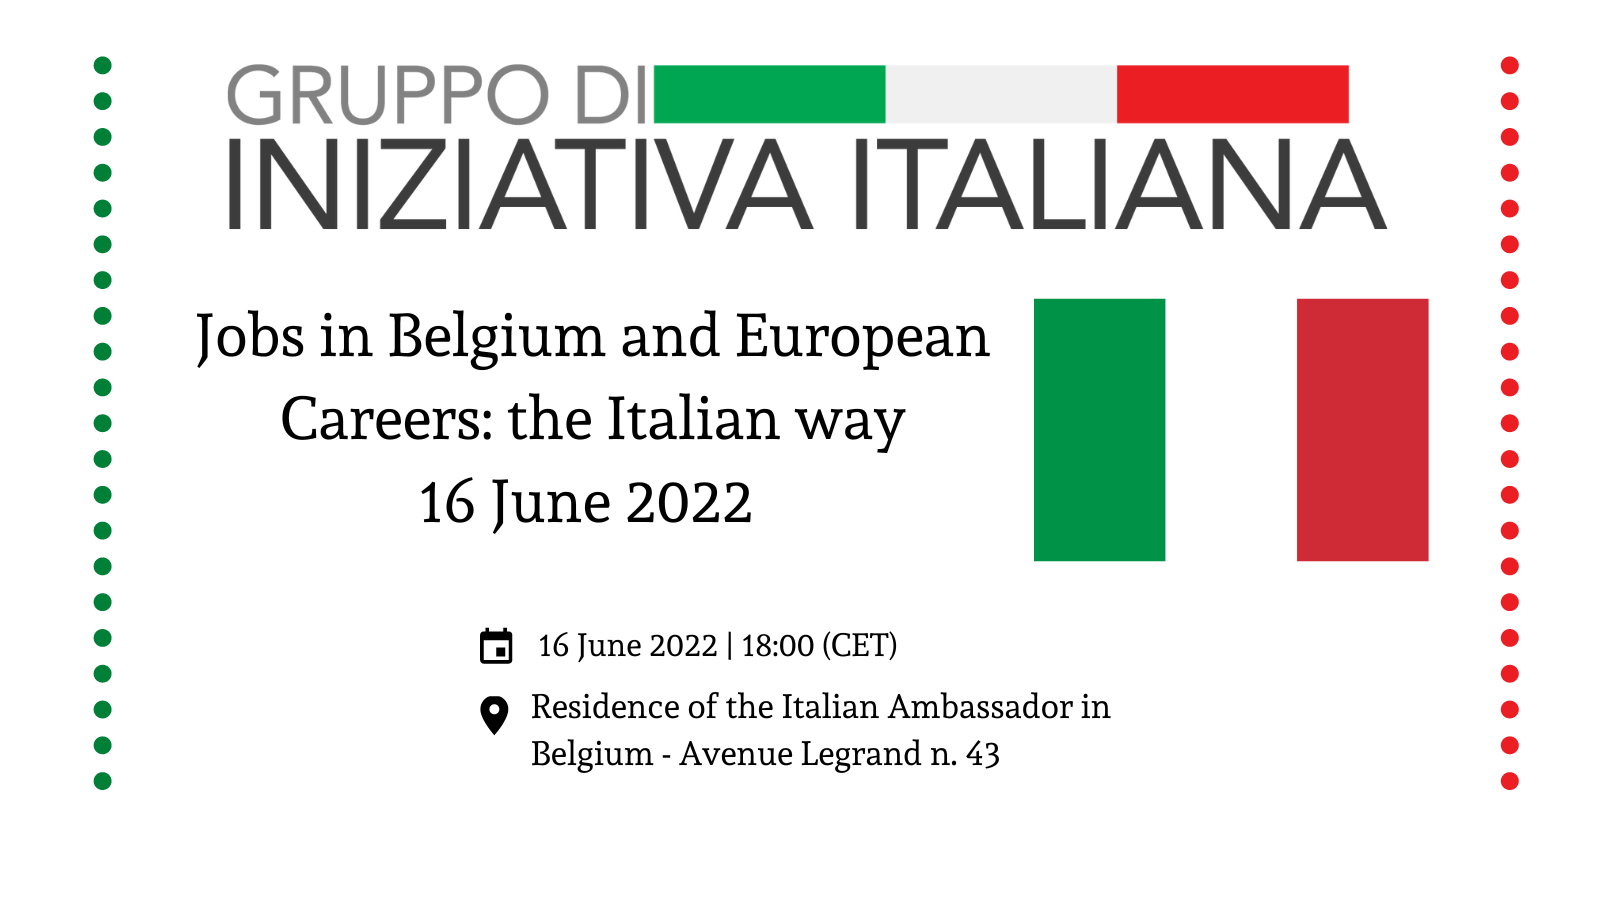 Jobs in Belgium and European Careers: the Italian way. Talent recruiting and development in the service of the Italian system